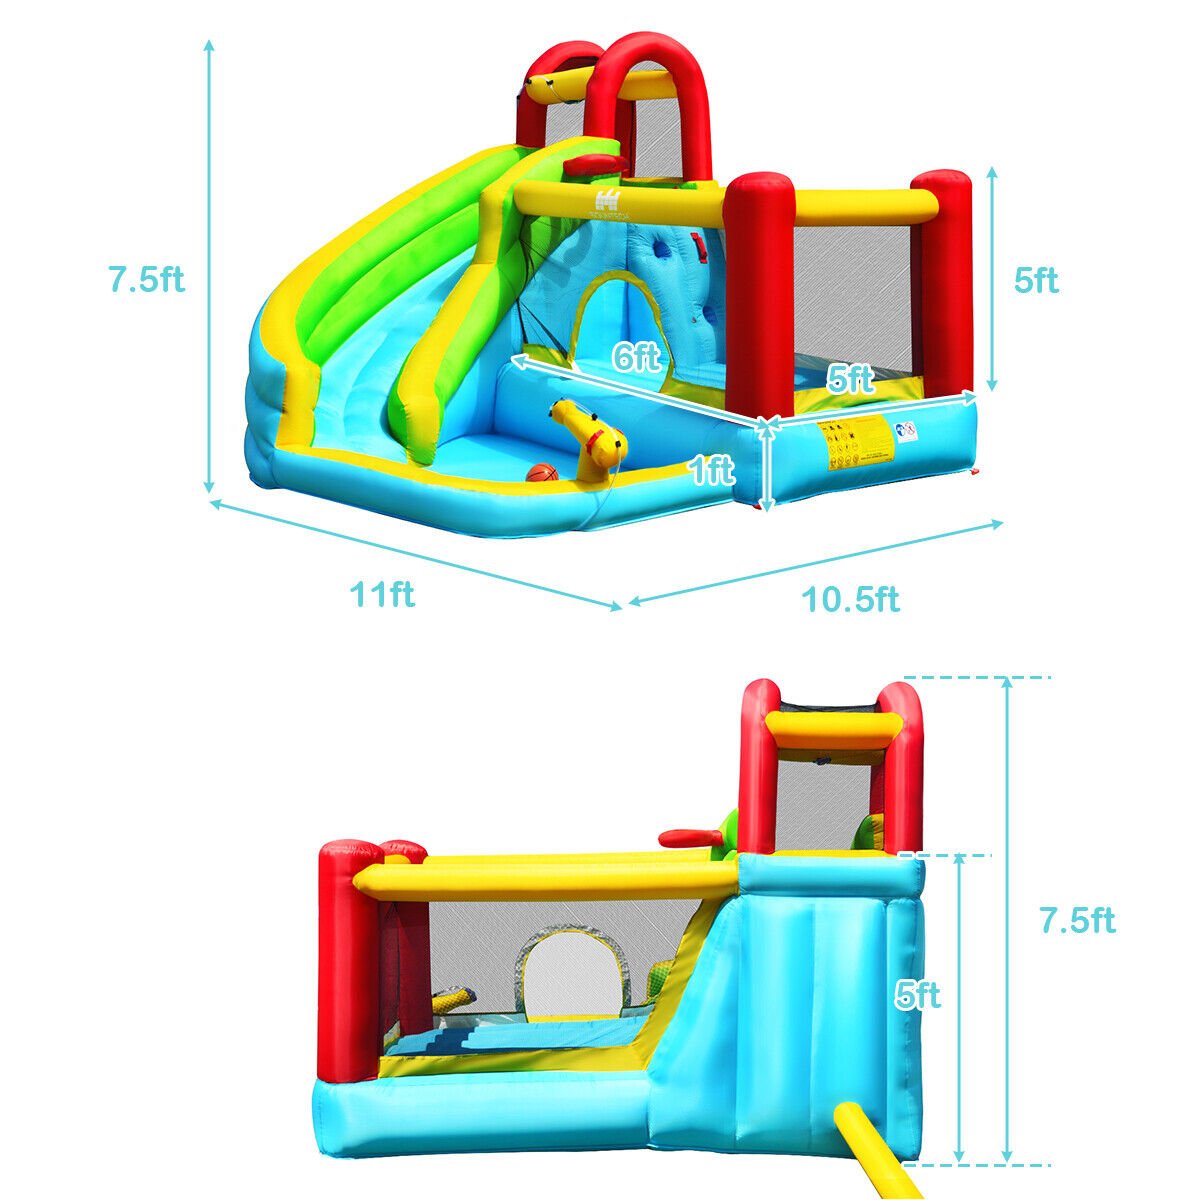 6-in-1 Inflatable Bounce House with Climbing Wall and Basketball Hoop without Blower - Gallery Canada